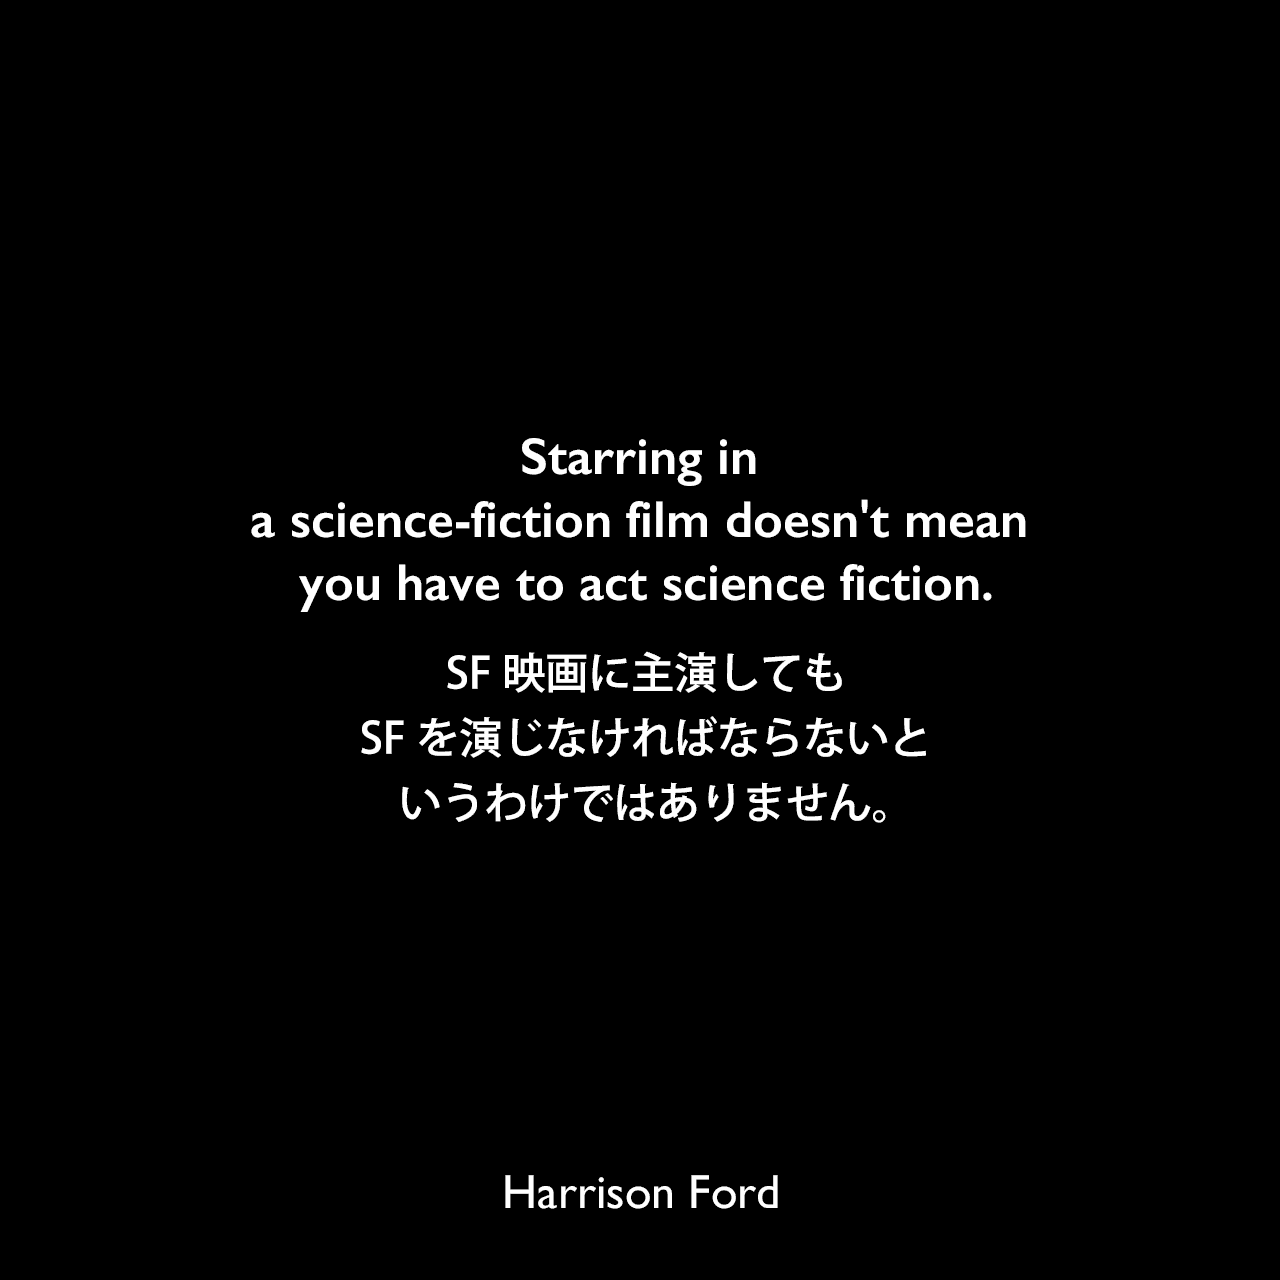 Starring in a science-fiction film doesn't mean you have to act science fiction.SF映画に主演しても、SFを演じなければならないというわけではありません。Harrison Ford